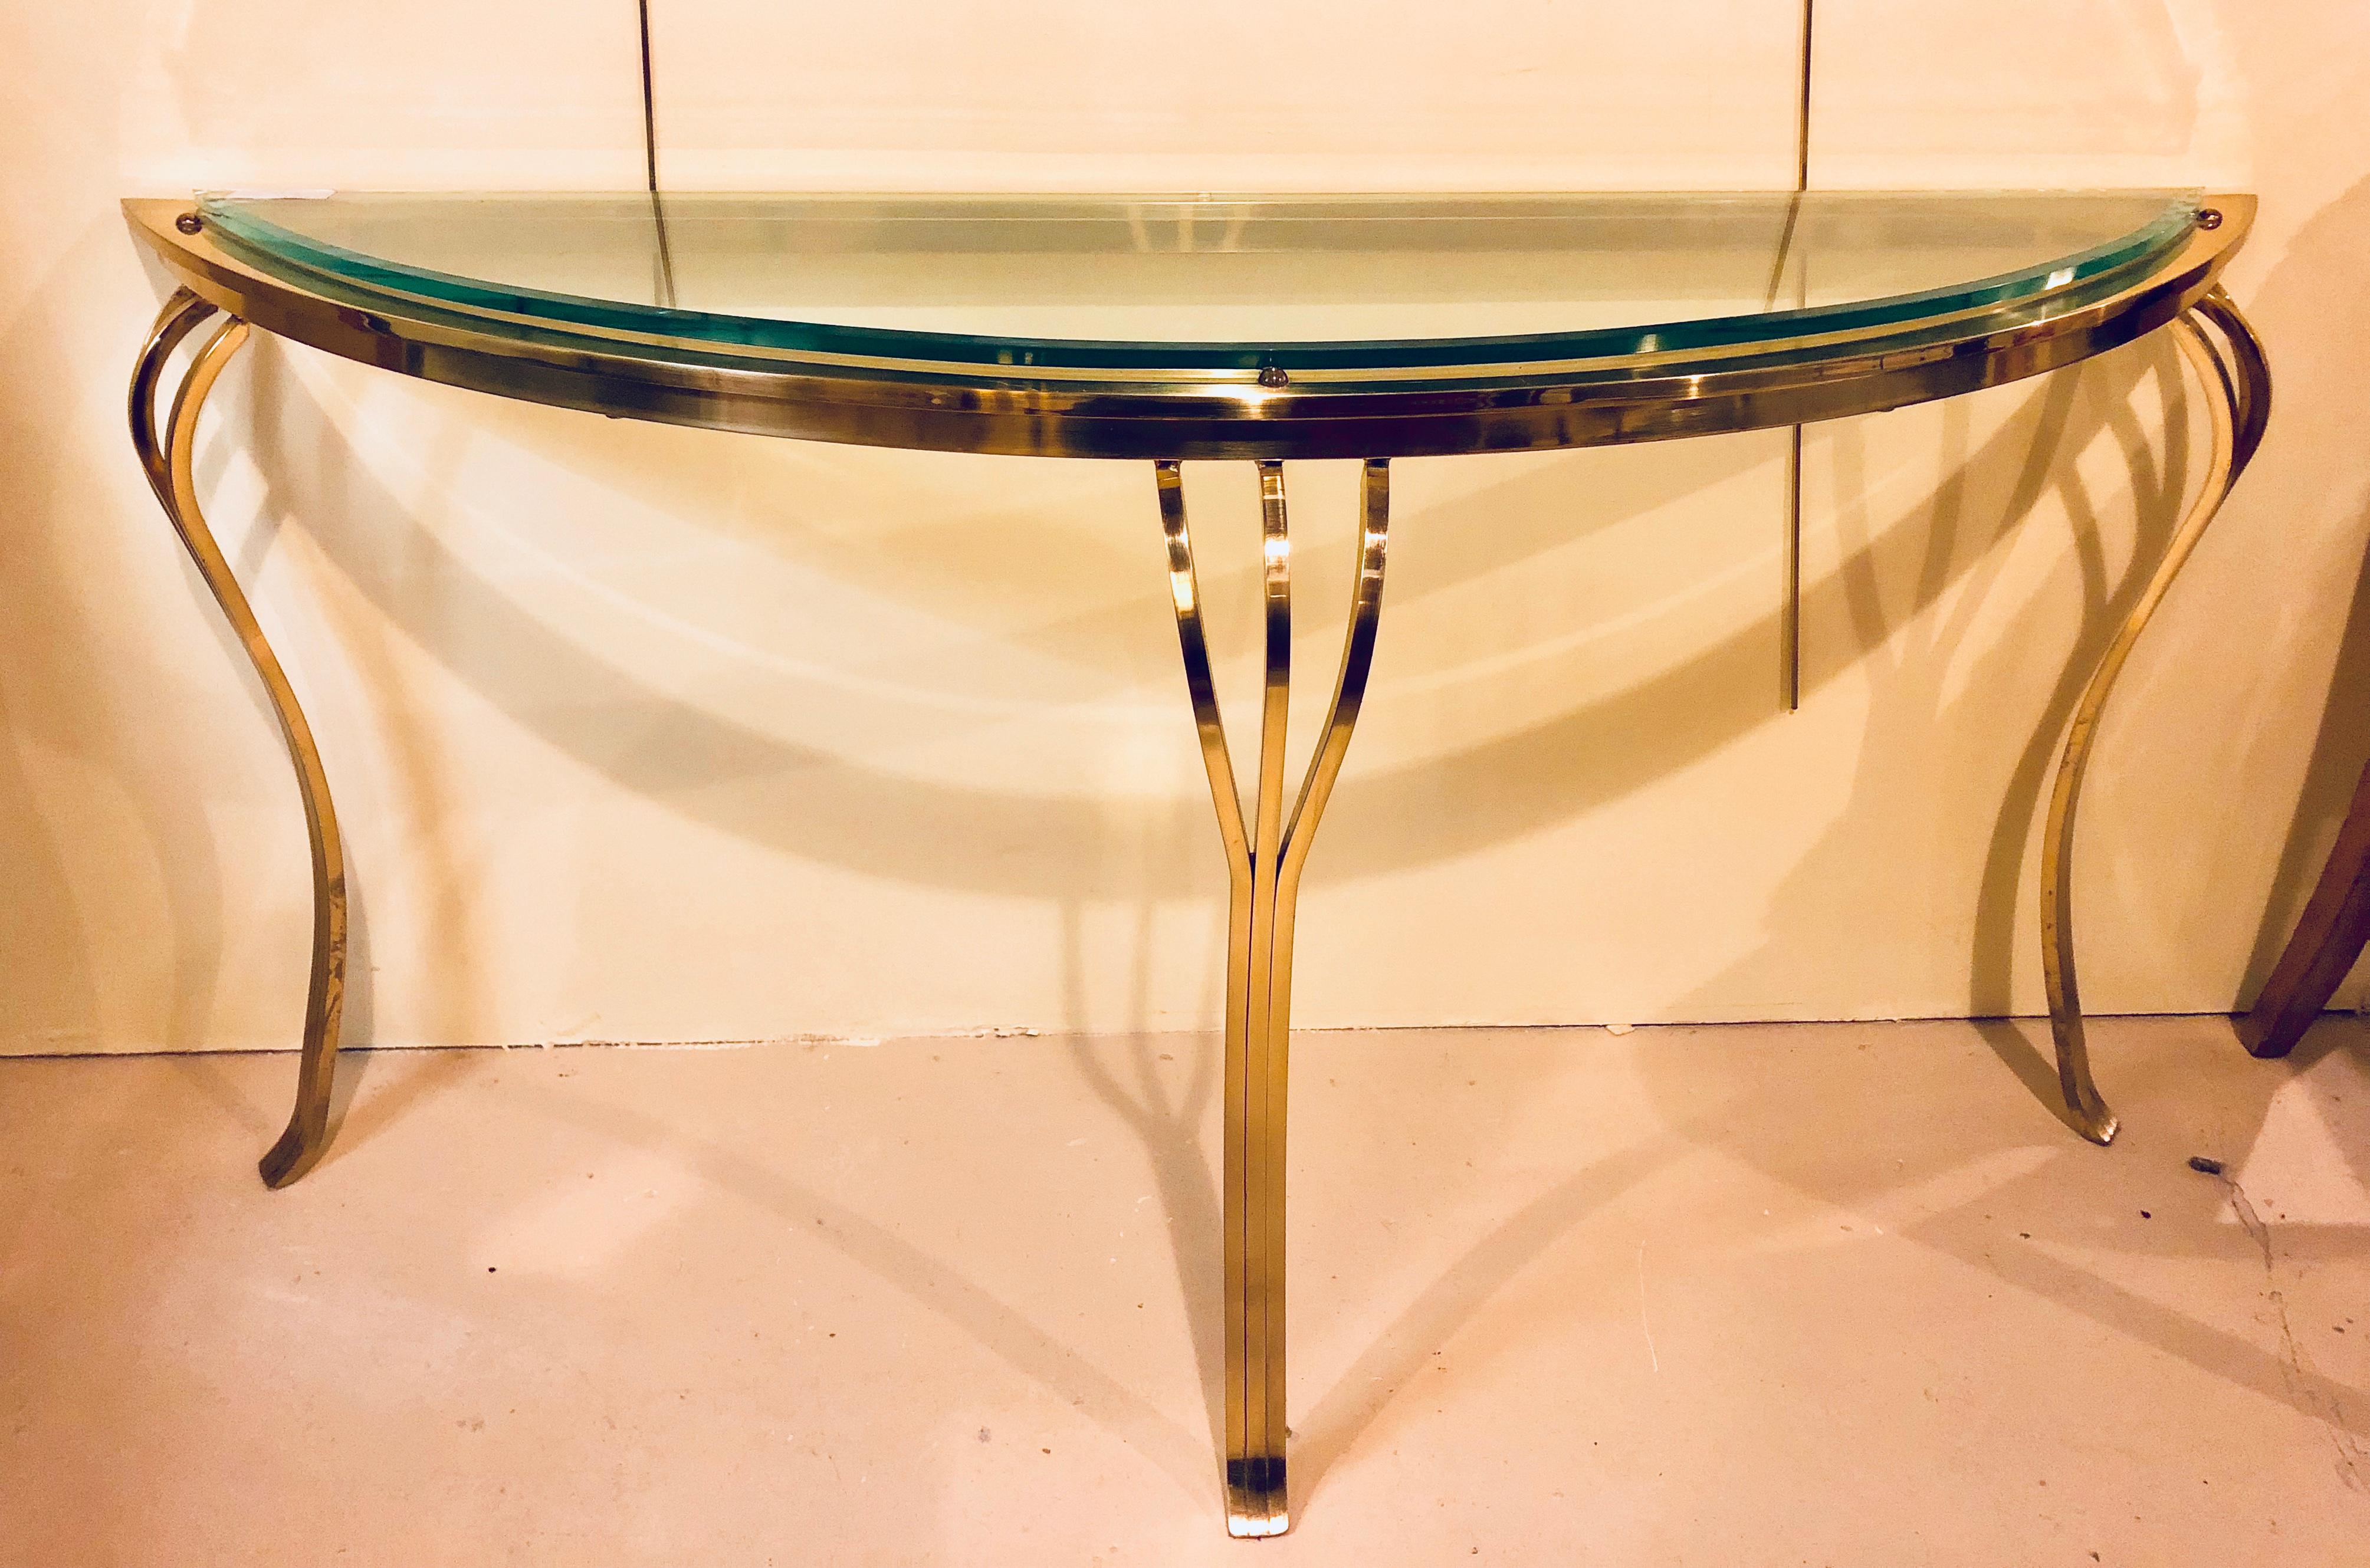 Hollywood Regency style brass and glass top demilune console table beveled glass having cabriole legs. This lovely console table has a 3/8 inch thick beveled glass top. There is a tiny chip on the edge of the glass, priced into consideration,